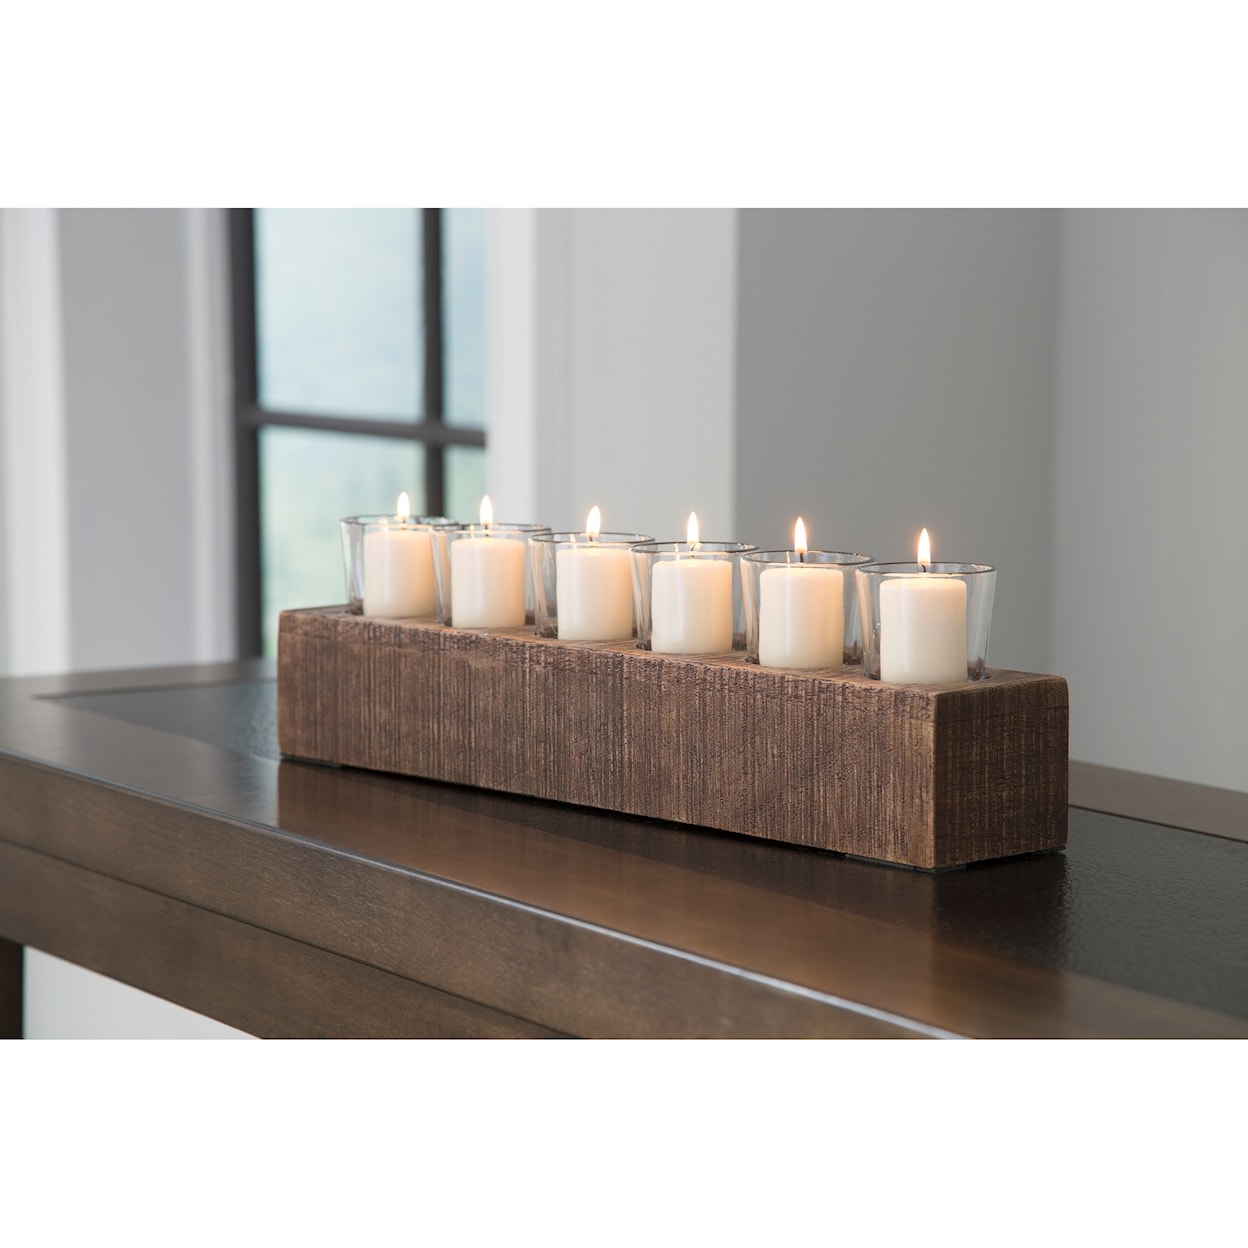 Ashley Accents Cassandra Brown Candle Holder